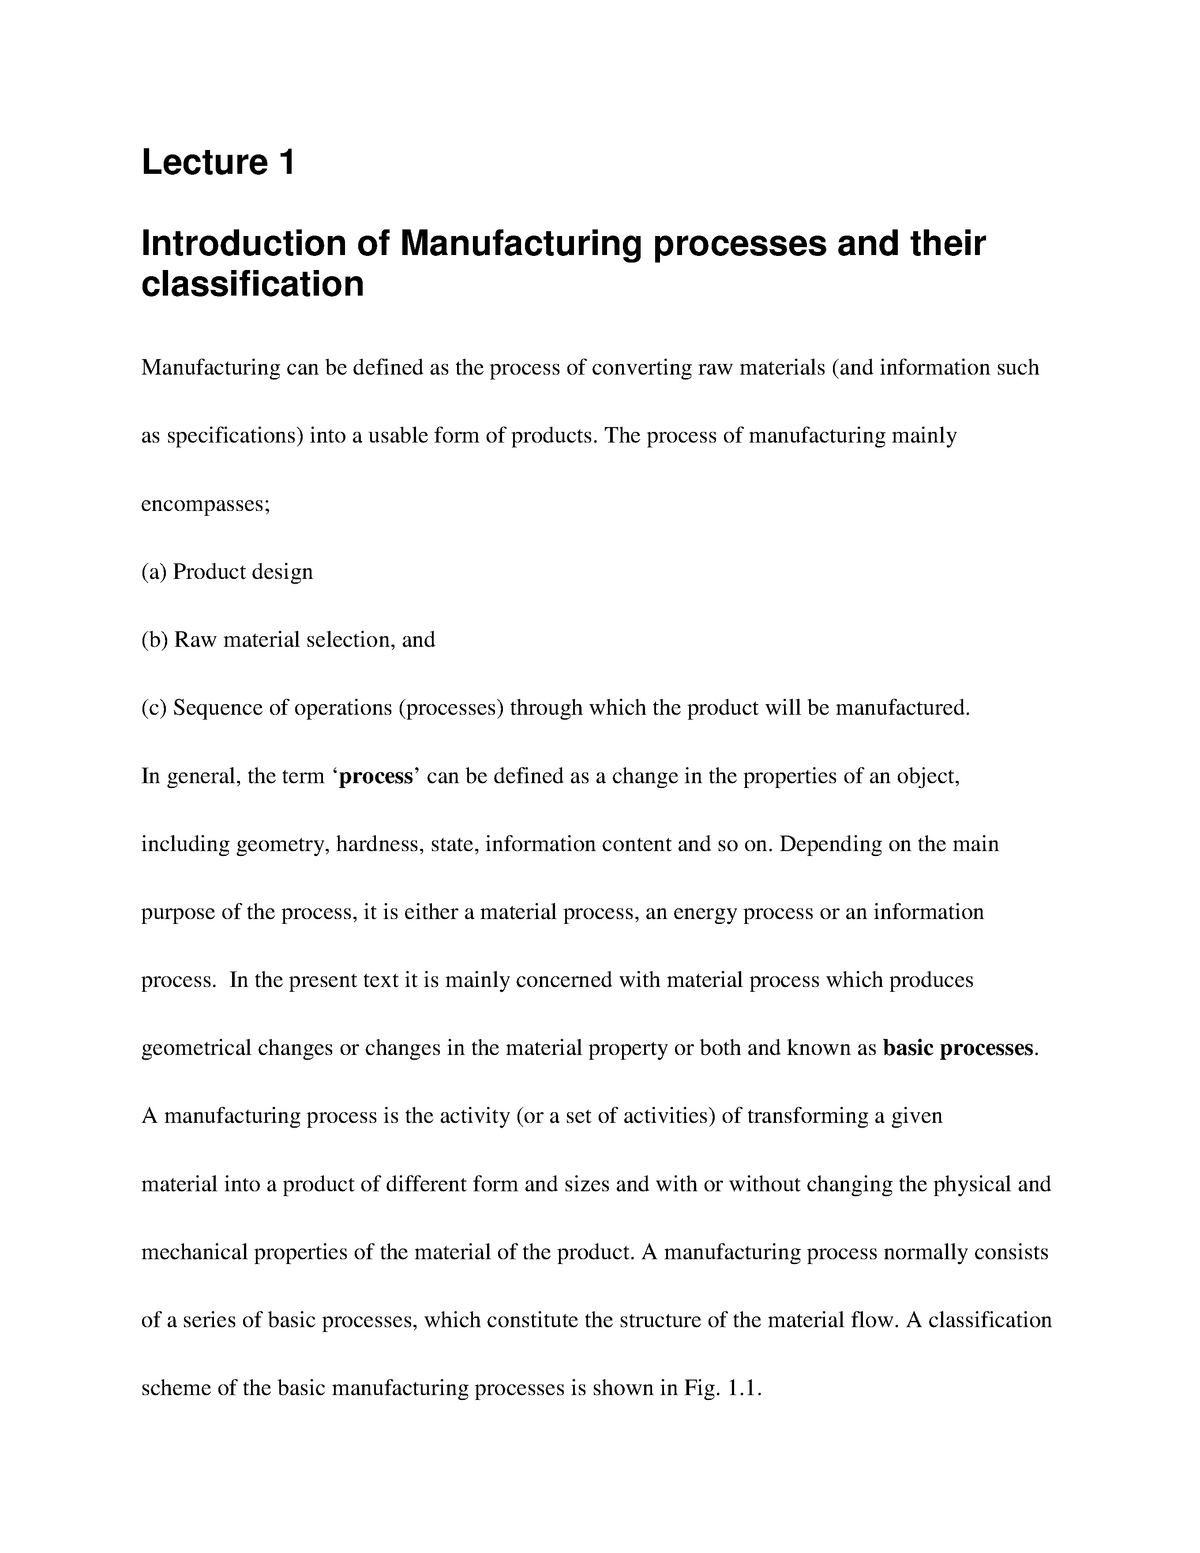 research papers on manufacturing processes